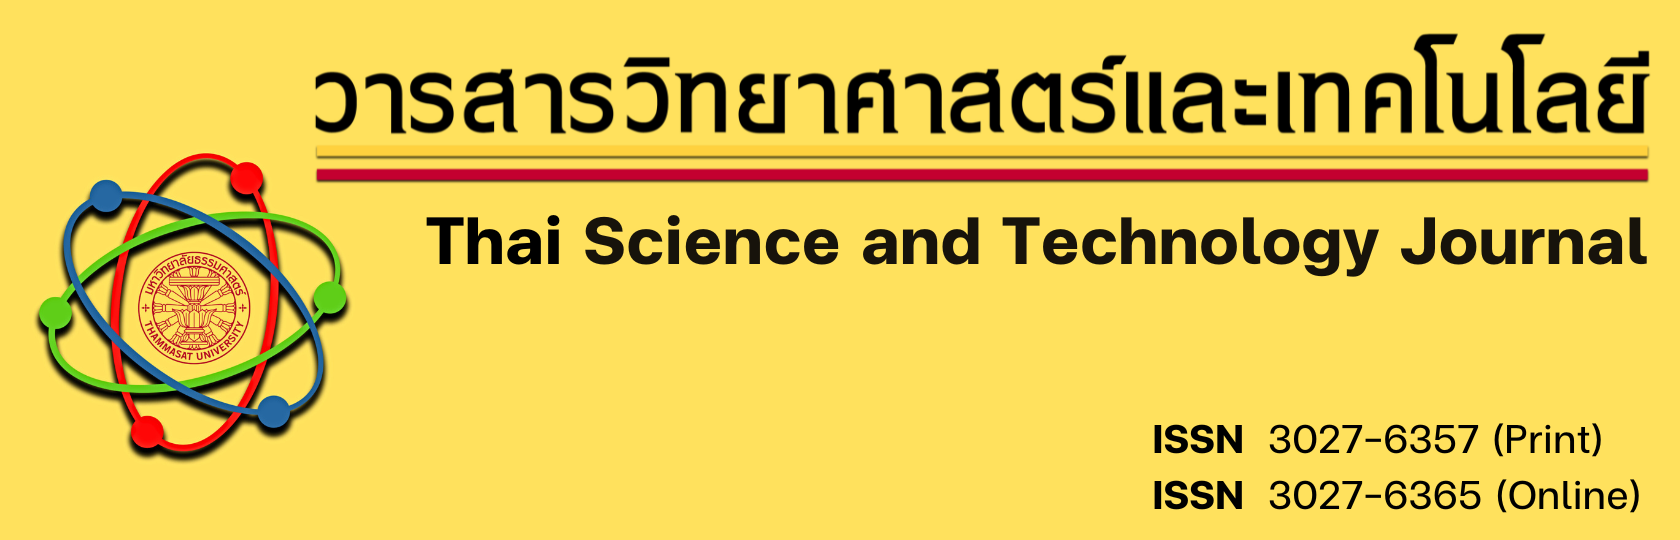 Thai Science and Technology Journal